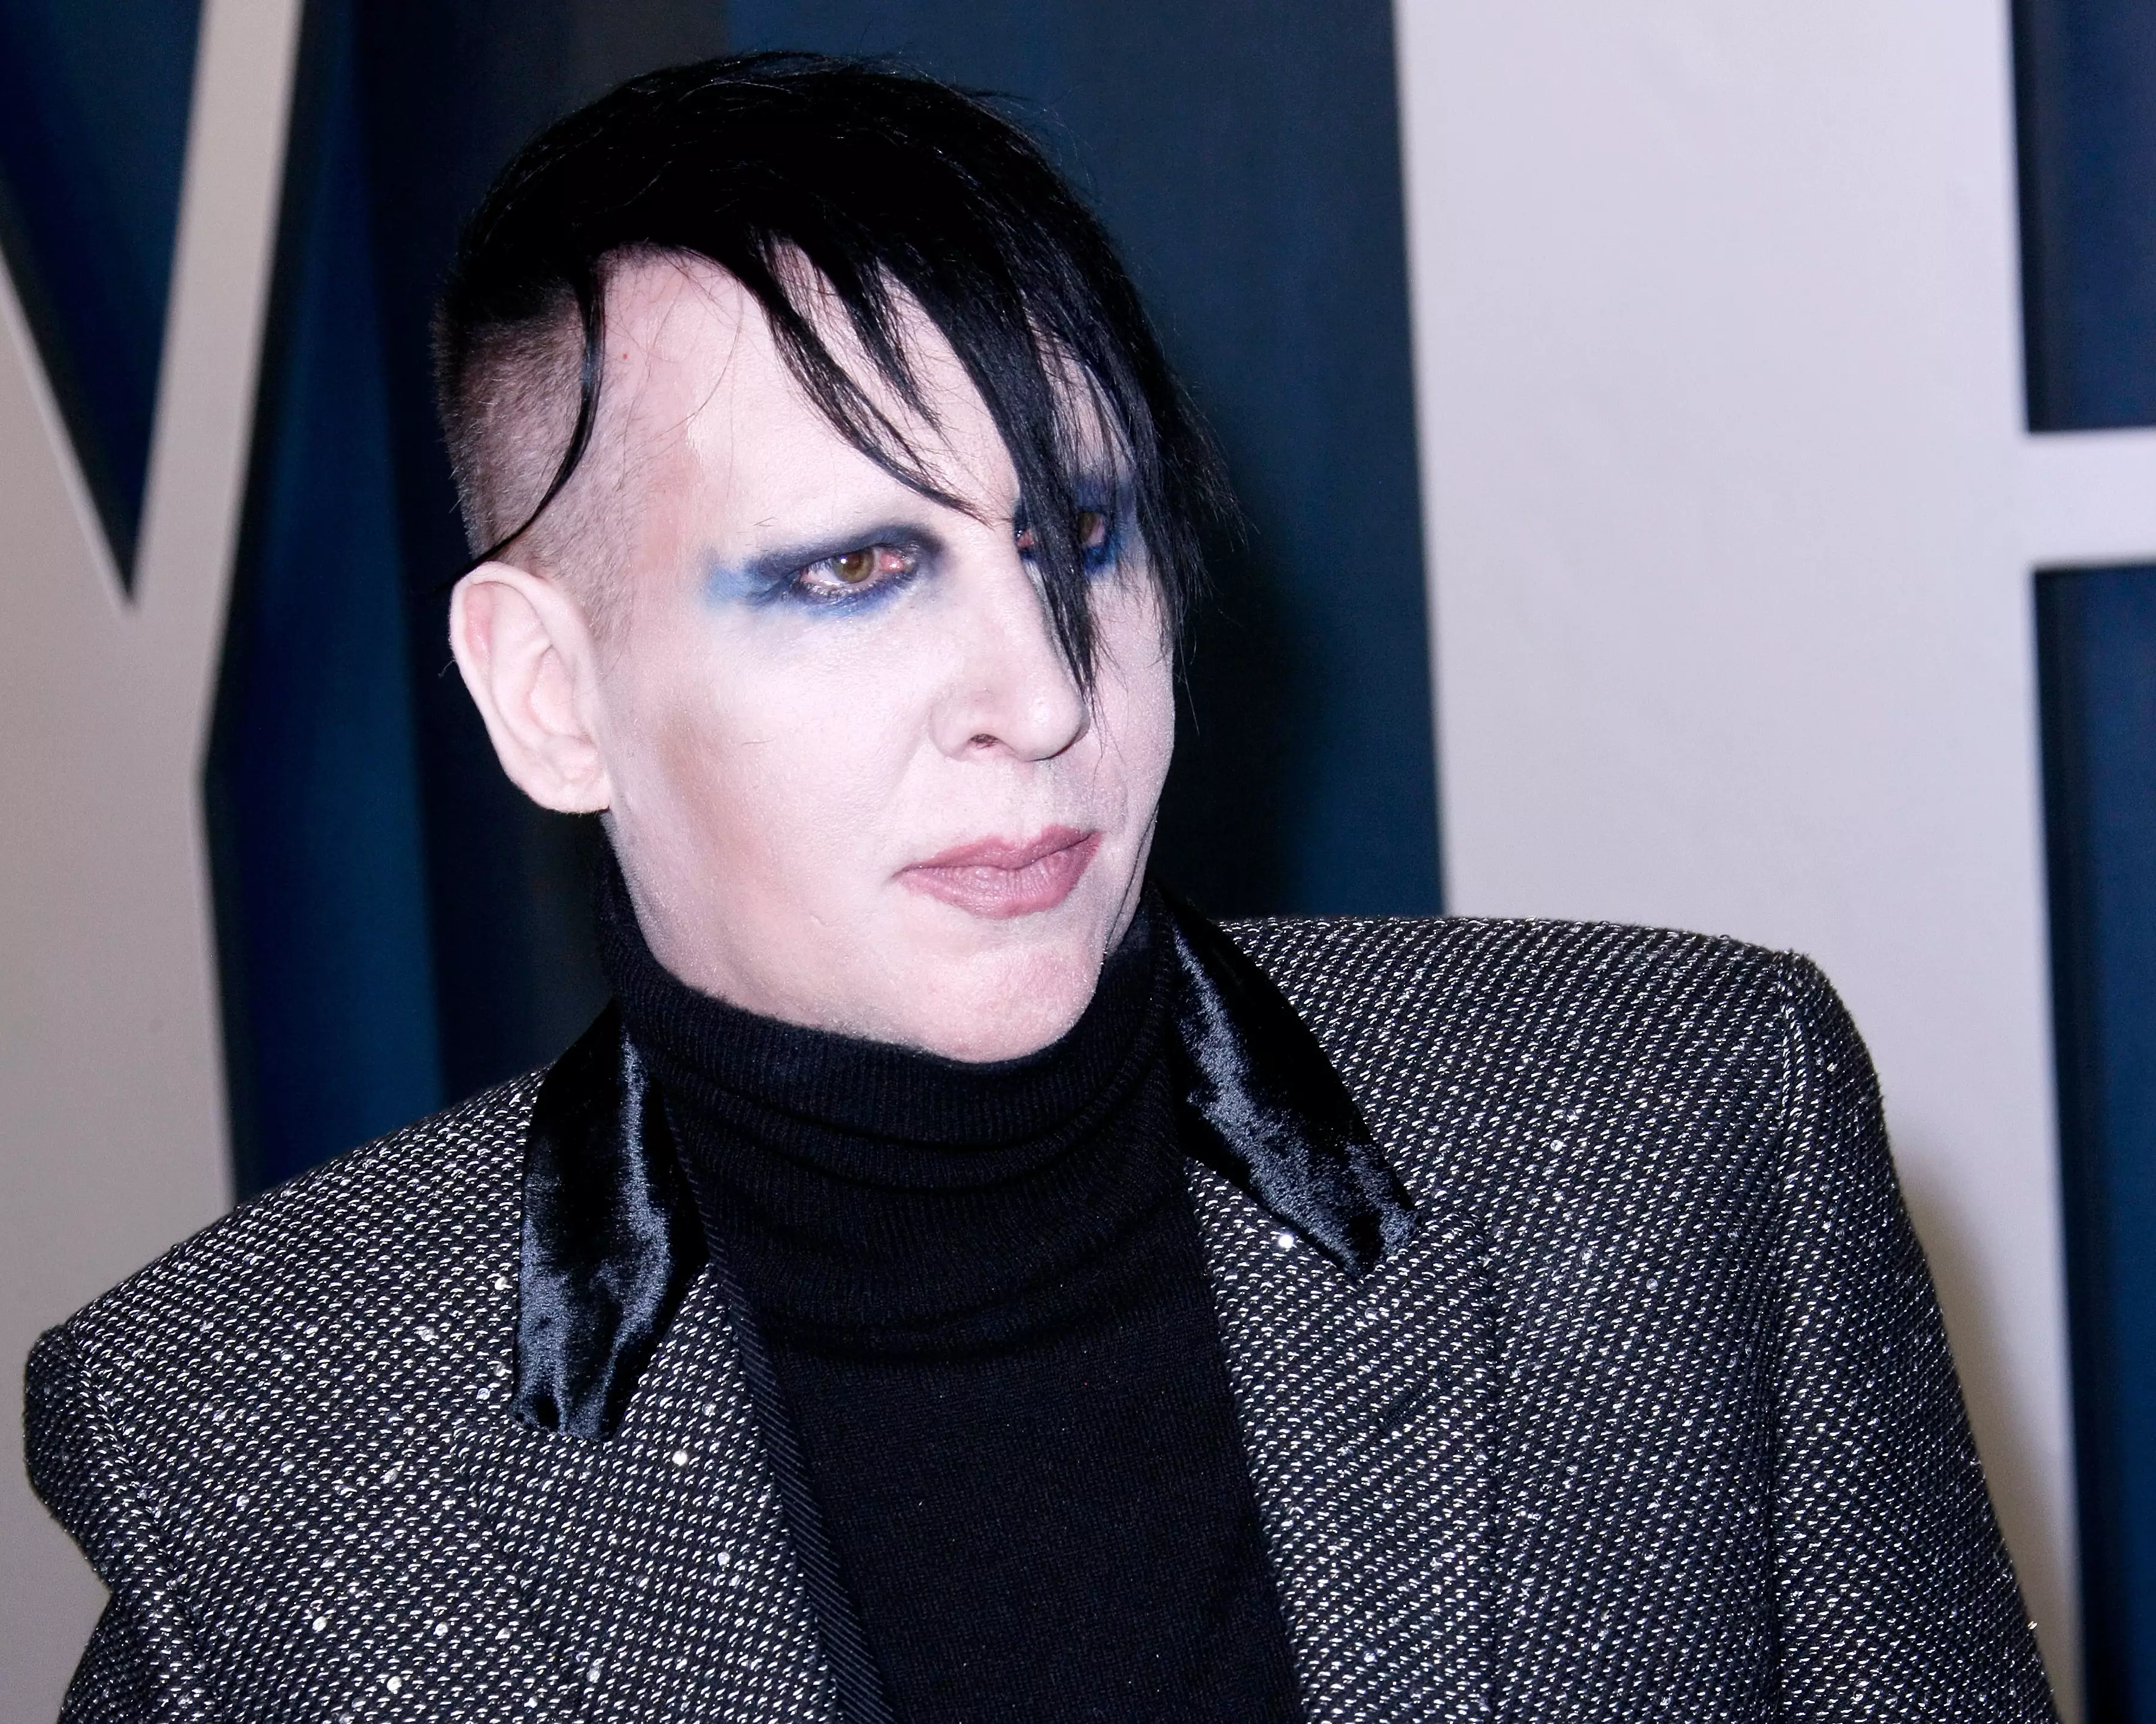 Manson has been accused of abuse by as many as 10 women in the last week (